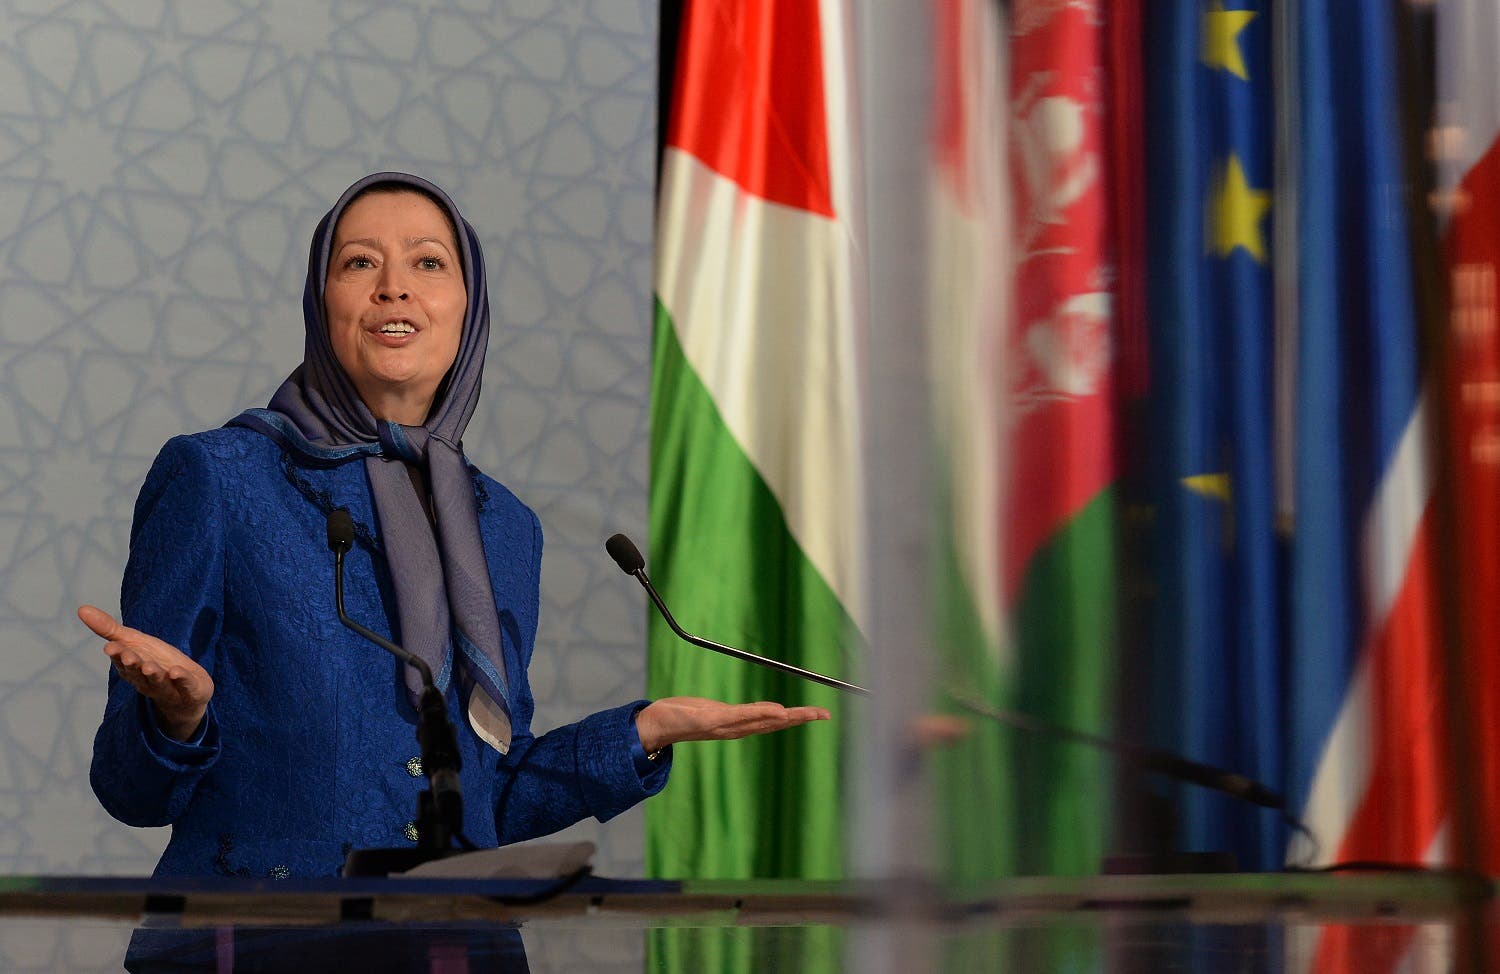 Ms. Maryam Rajavi addressing the regional instability caused by the iranian regime's recent activity